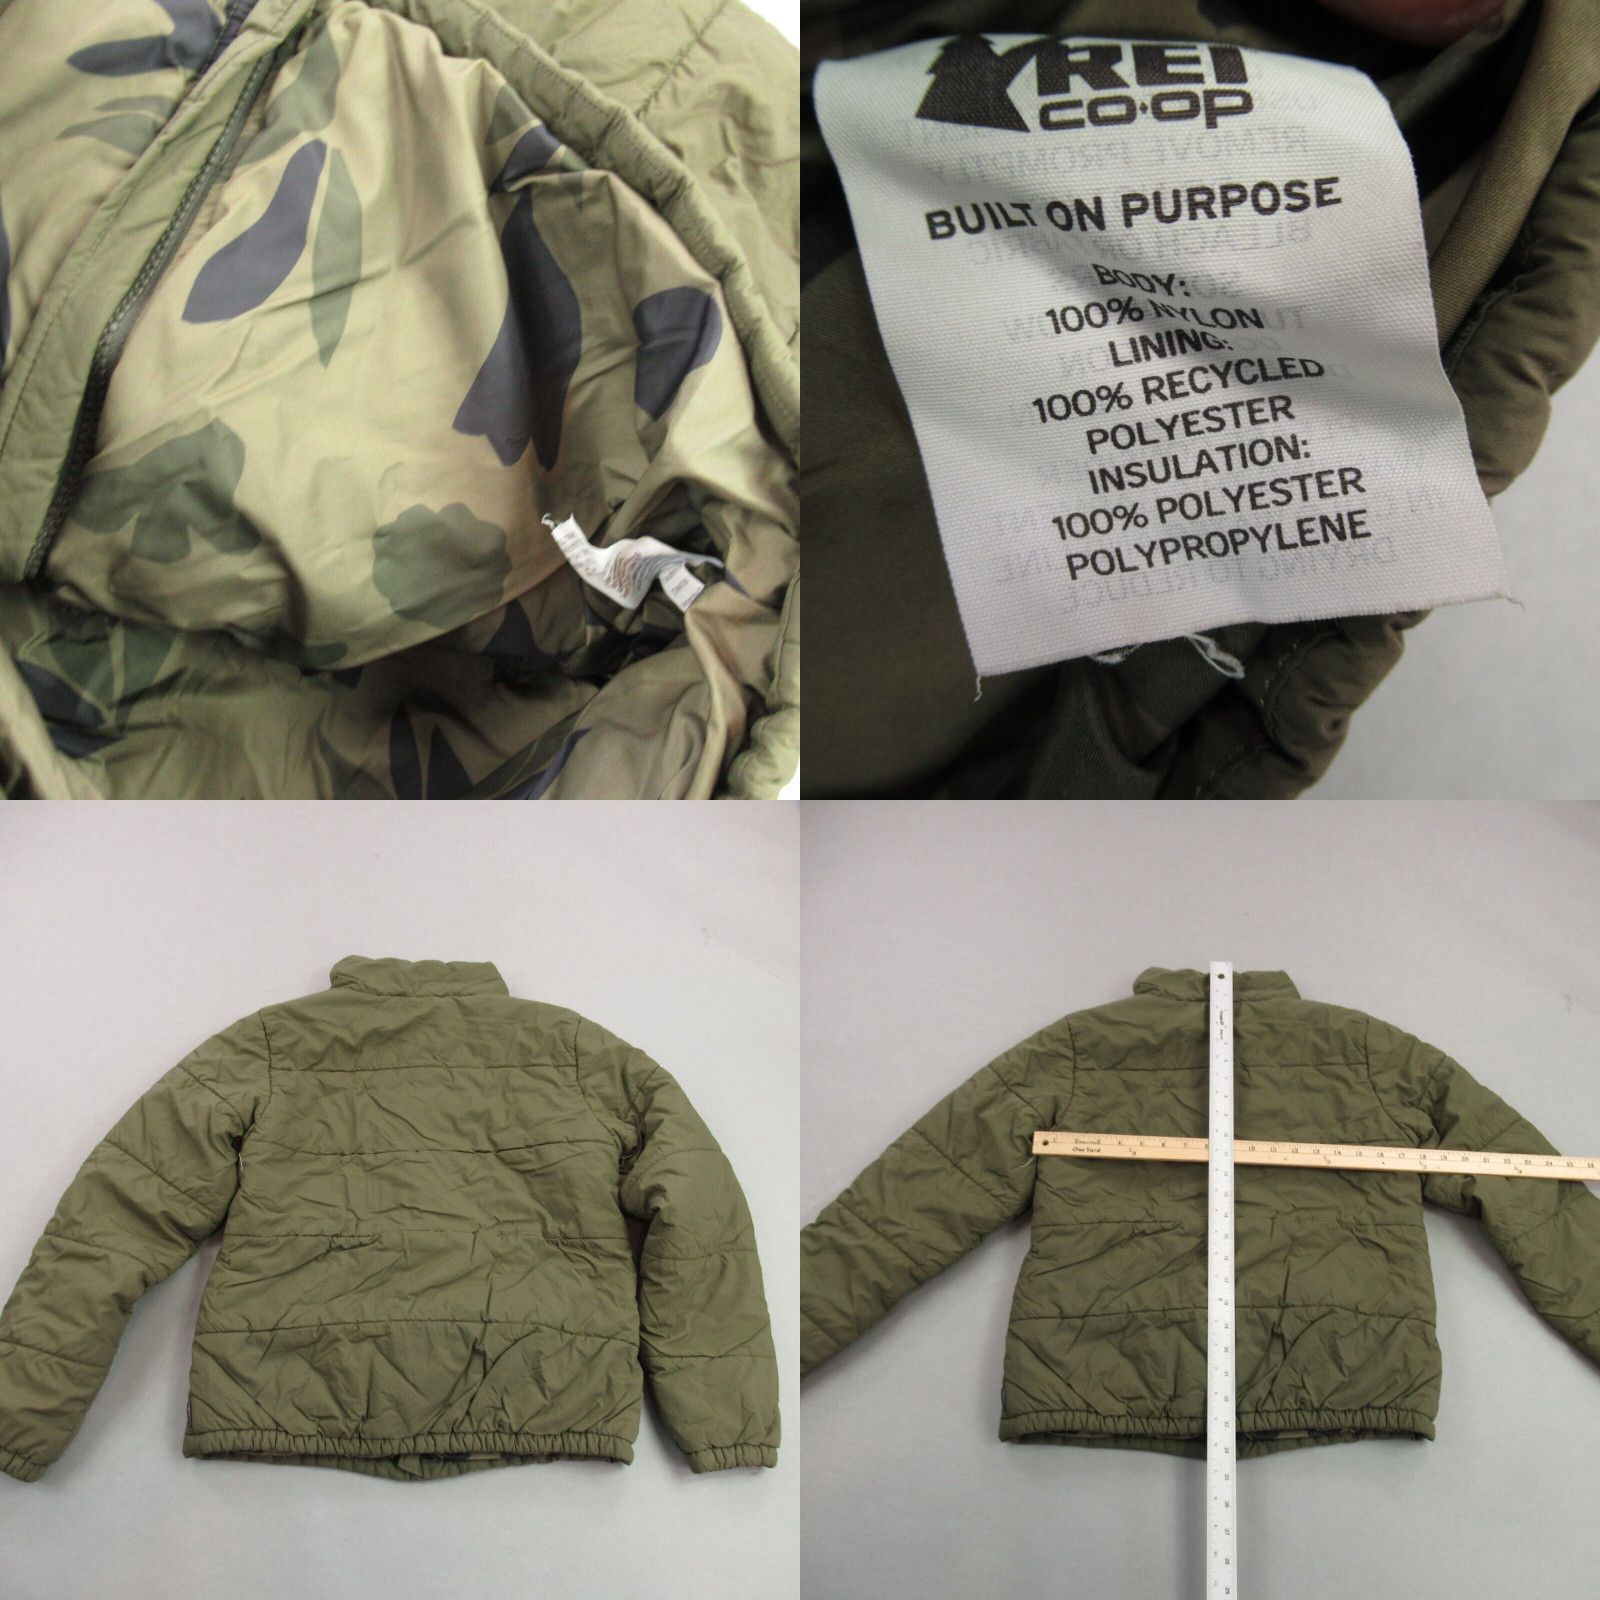 Vintage REI Jacket Boys Small Full Zip Long Sleeve Pockets Casual Reversible Green Camo Size US S / EU 44-46 / 1 - 4 Preview